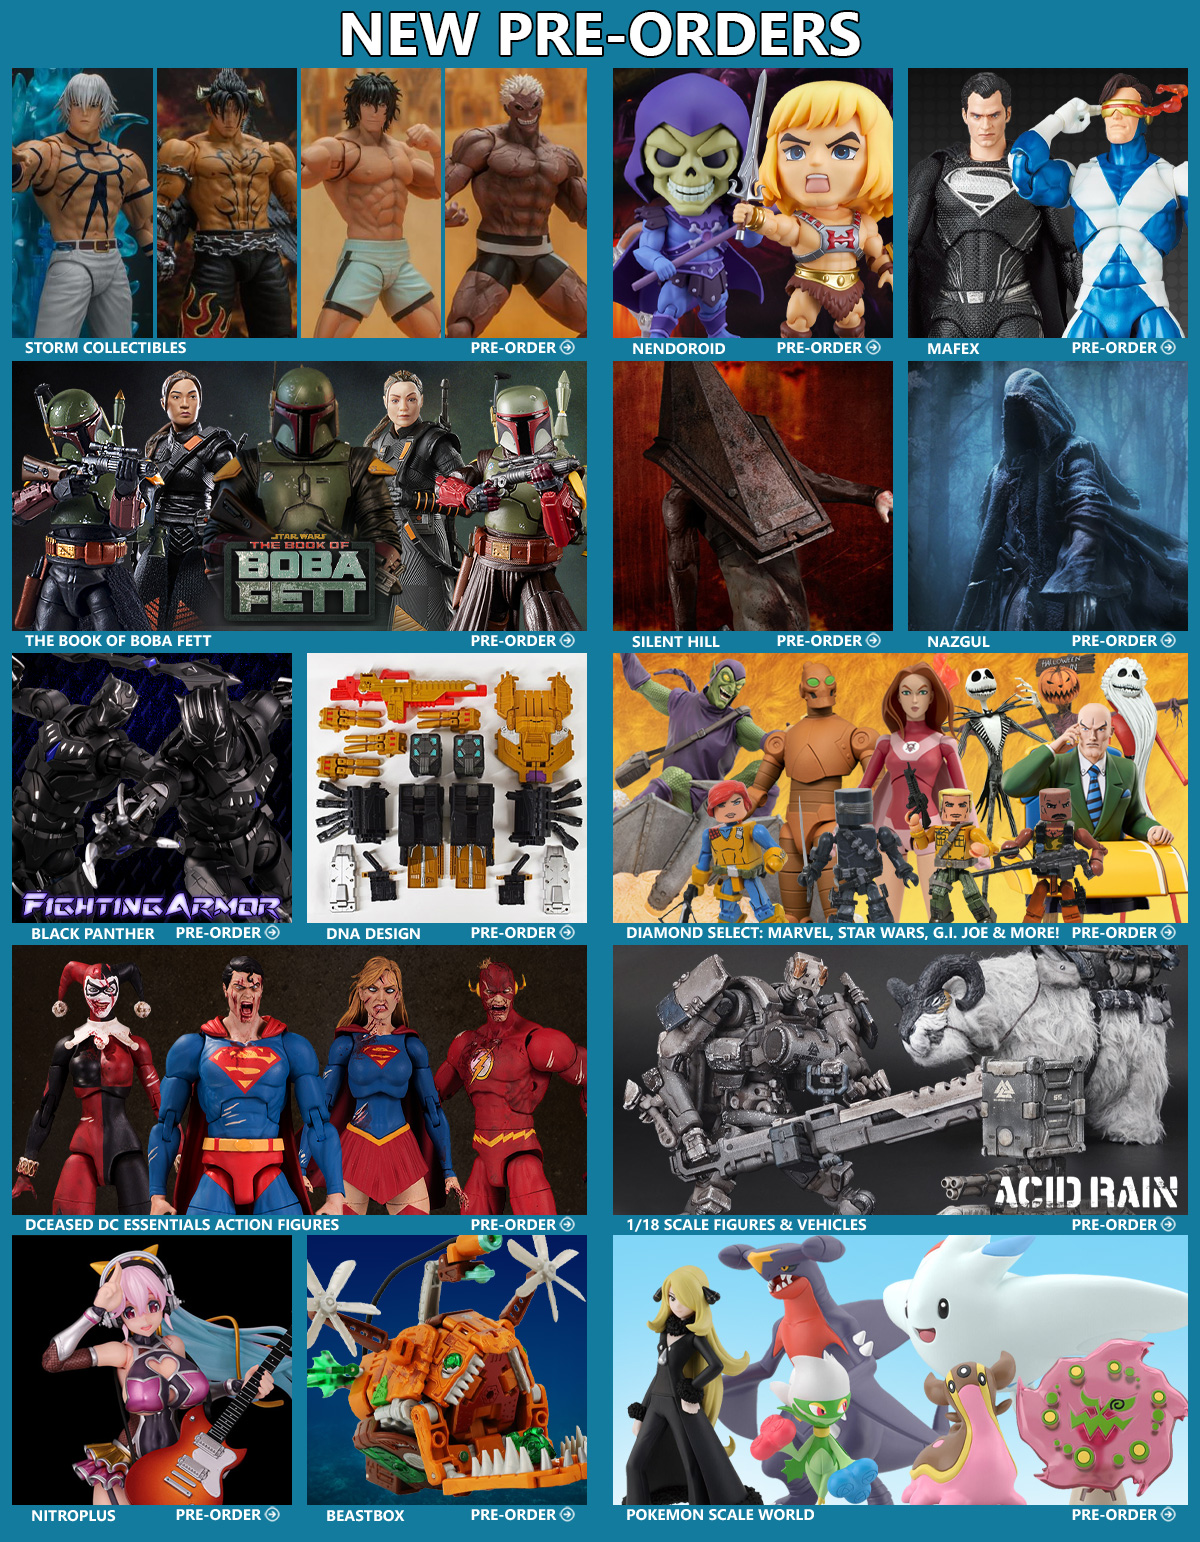 BigBadToyStore - Action Figures, Statues, Collectibles, and More!